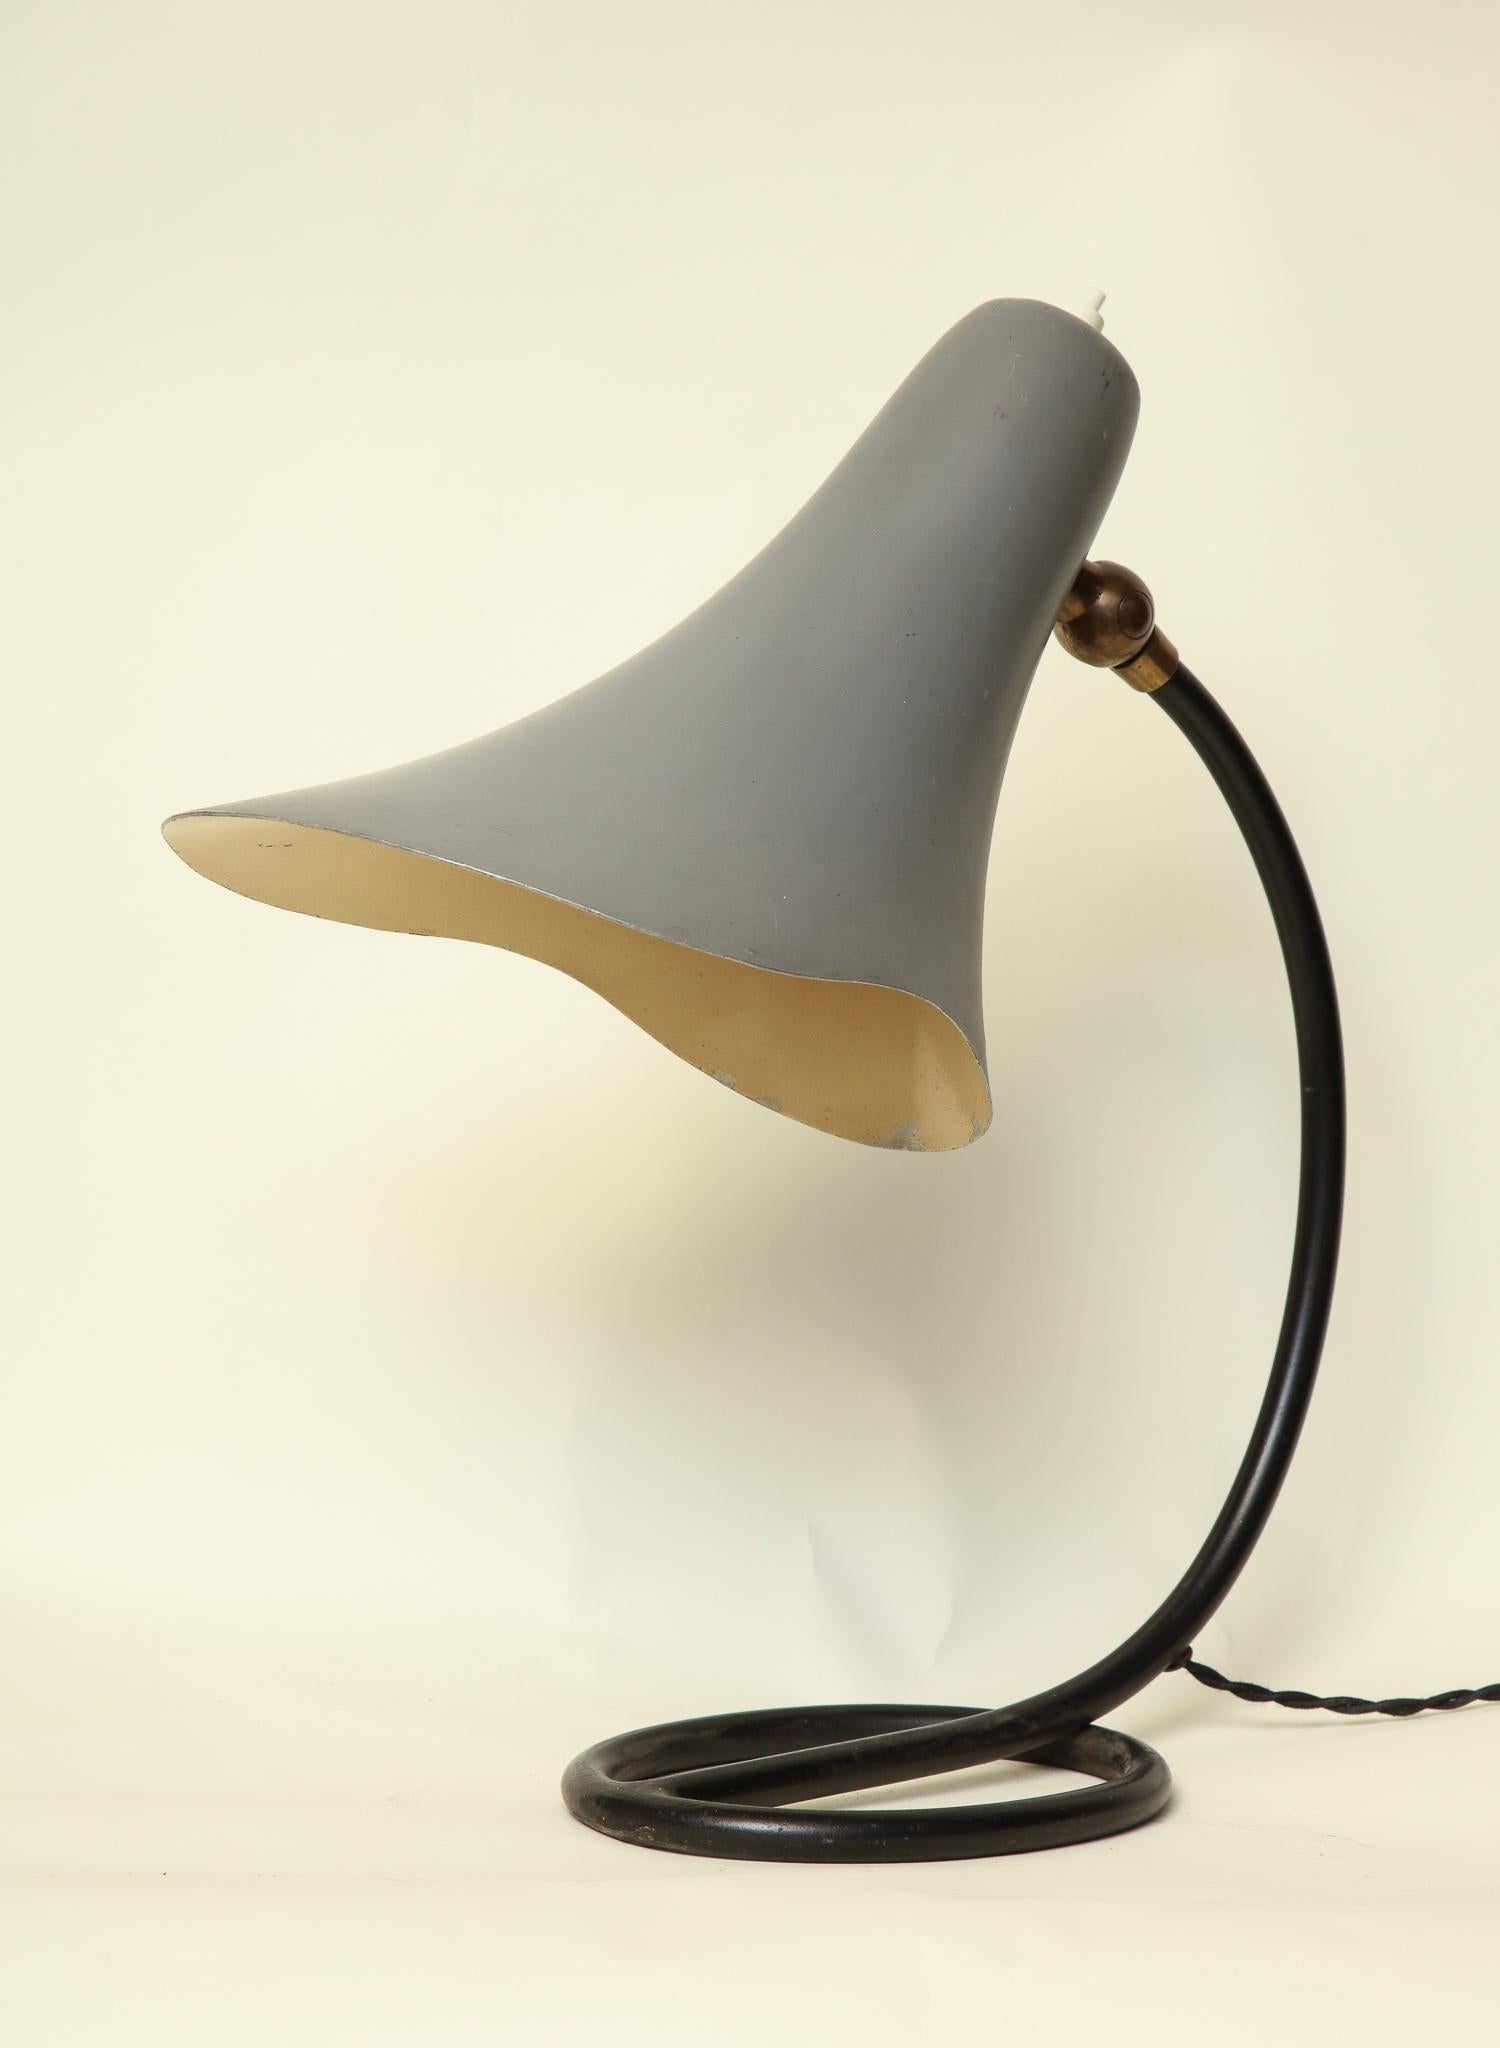 Articulated Table Lamp Mid-Century Modern Painted Metal Shade Adjusts Italy 1950 For Sale 2